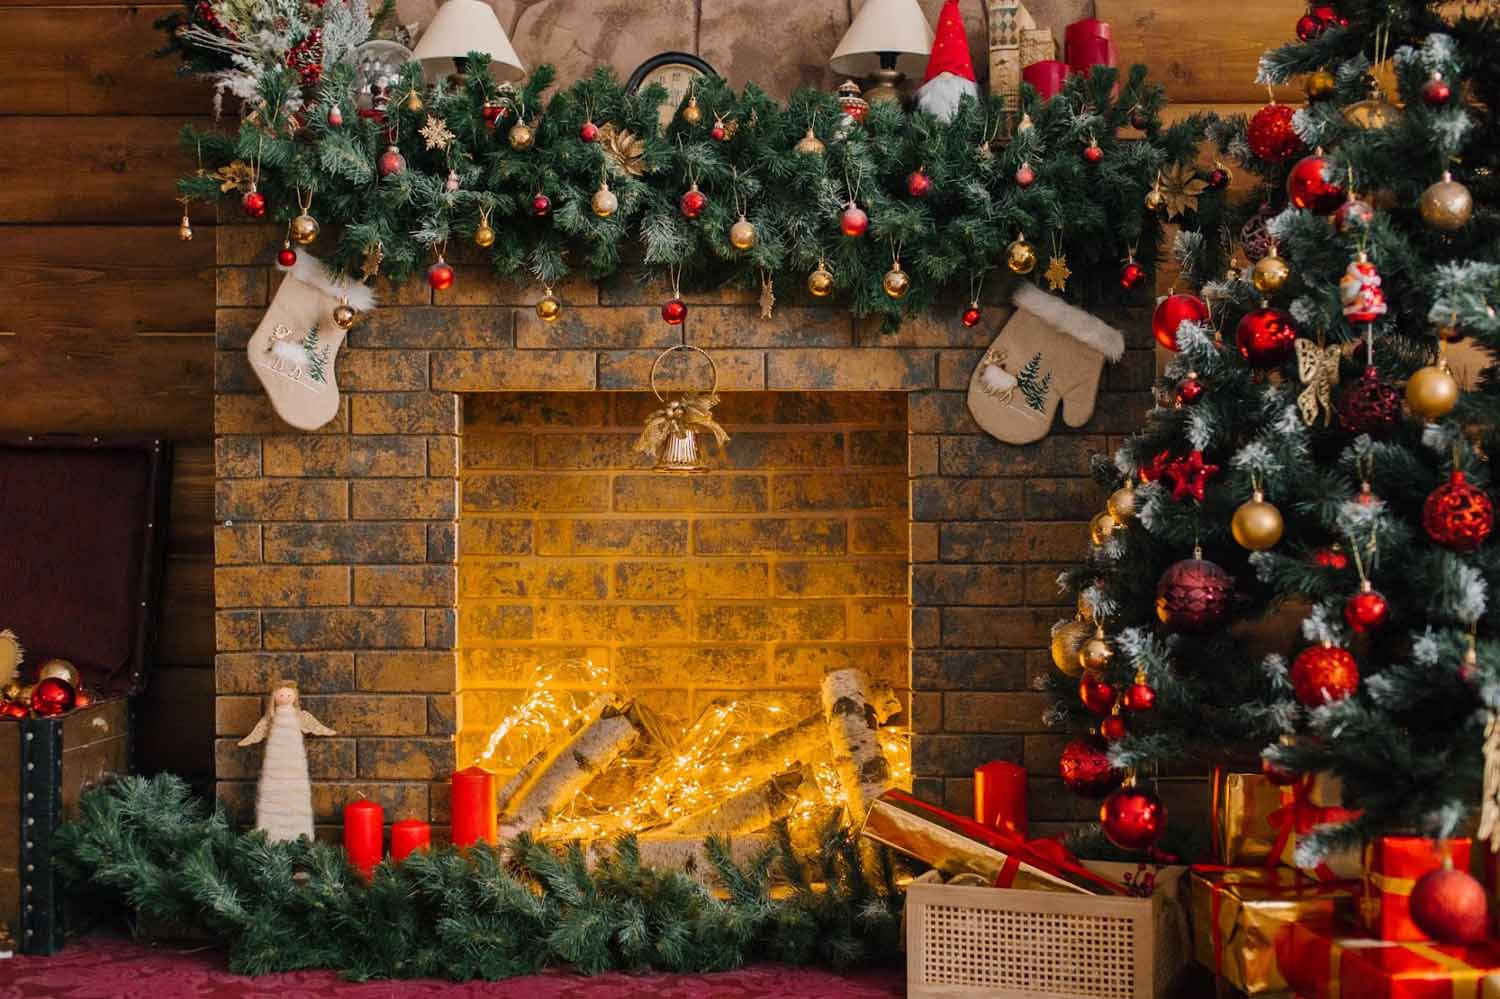 Holiday themed fireplace with vibrant red, green and gold prominent colors. The fireplace is illuminated with fiber optic LEDs in a warm white simulating the warm glow of a fire.